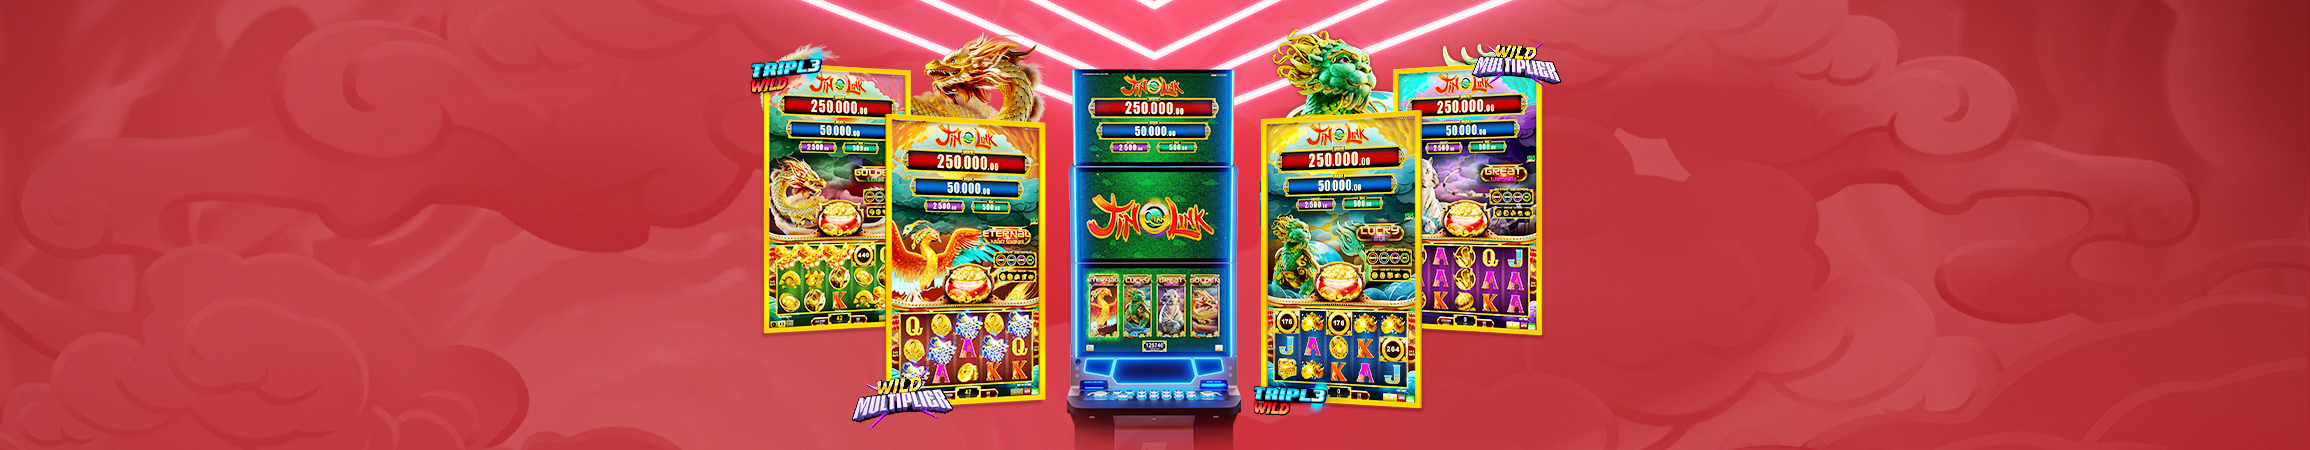 Jin Qián Link™: the slots game of Asian inspiration that has players on the edge of their seats